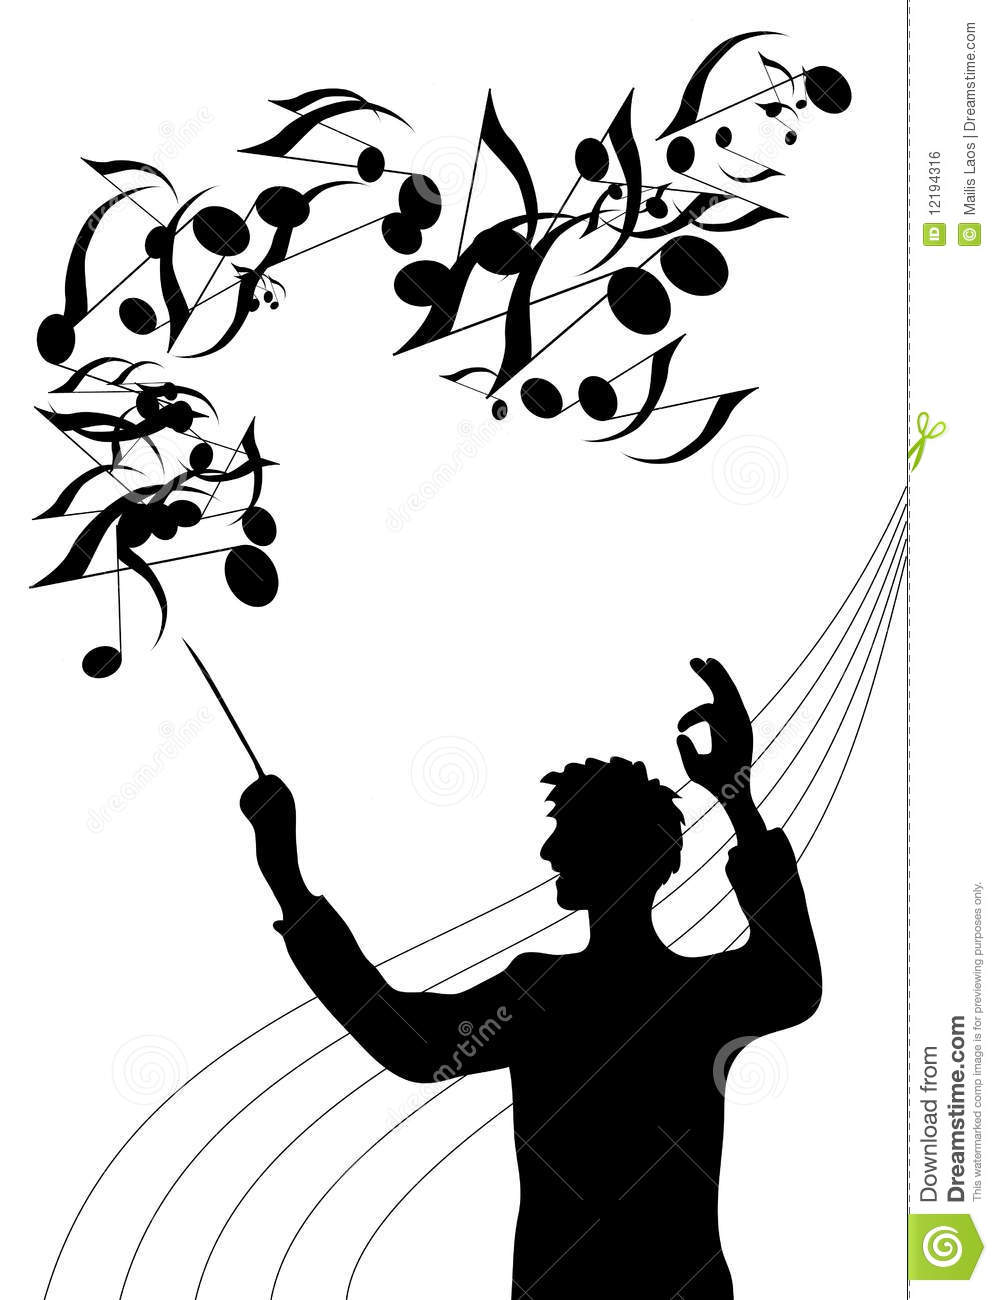 Illustration Of The Director Of A Choir With Baton In His Hand